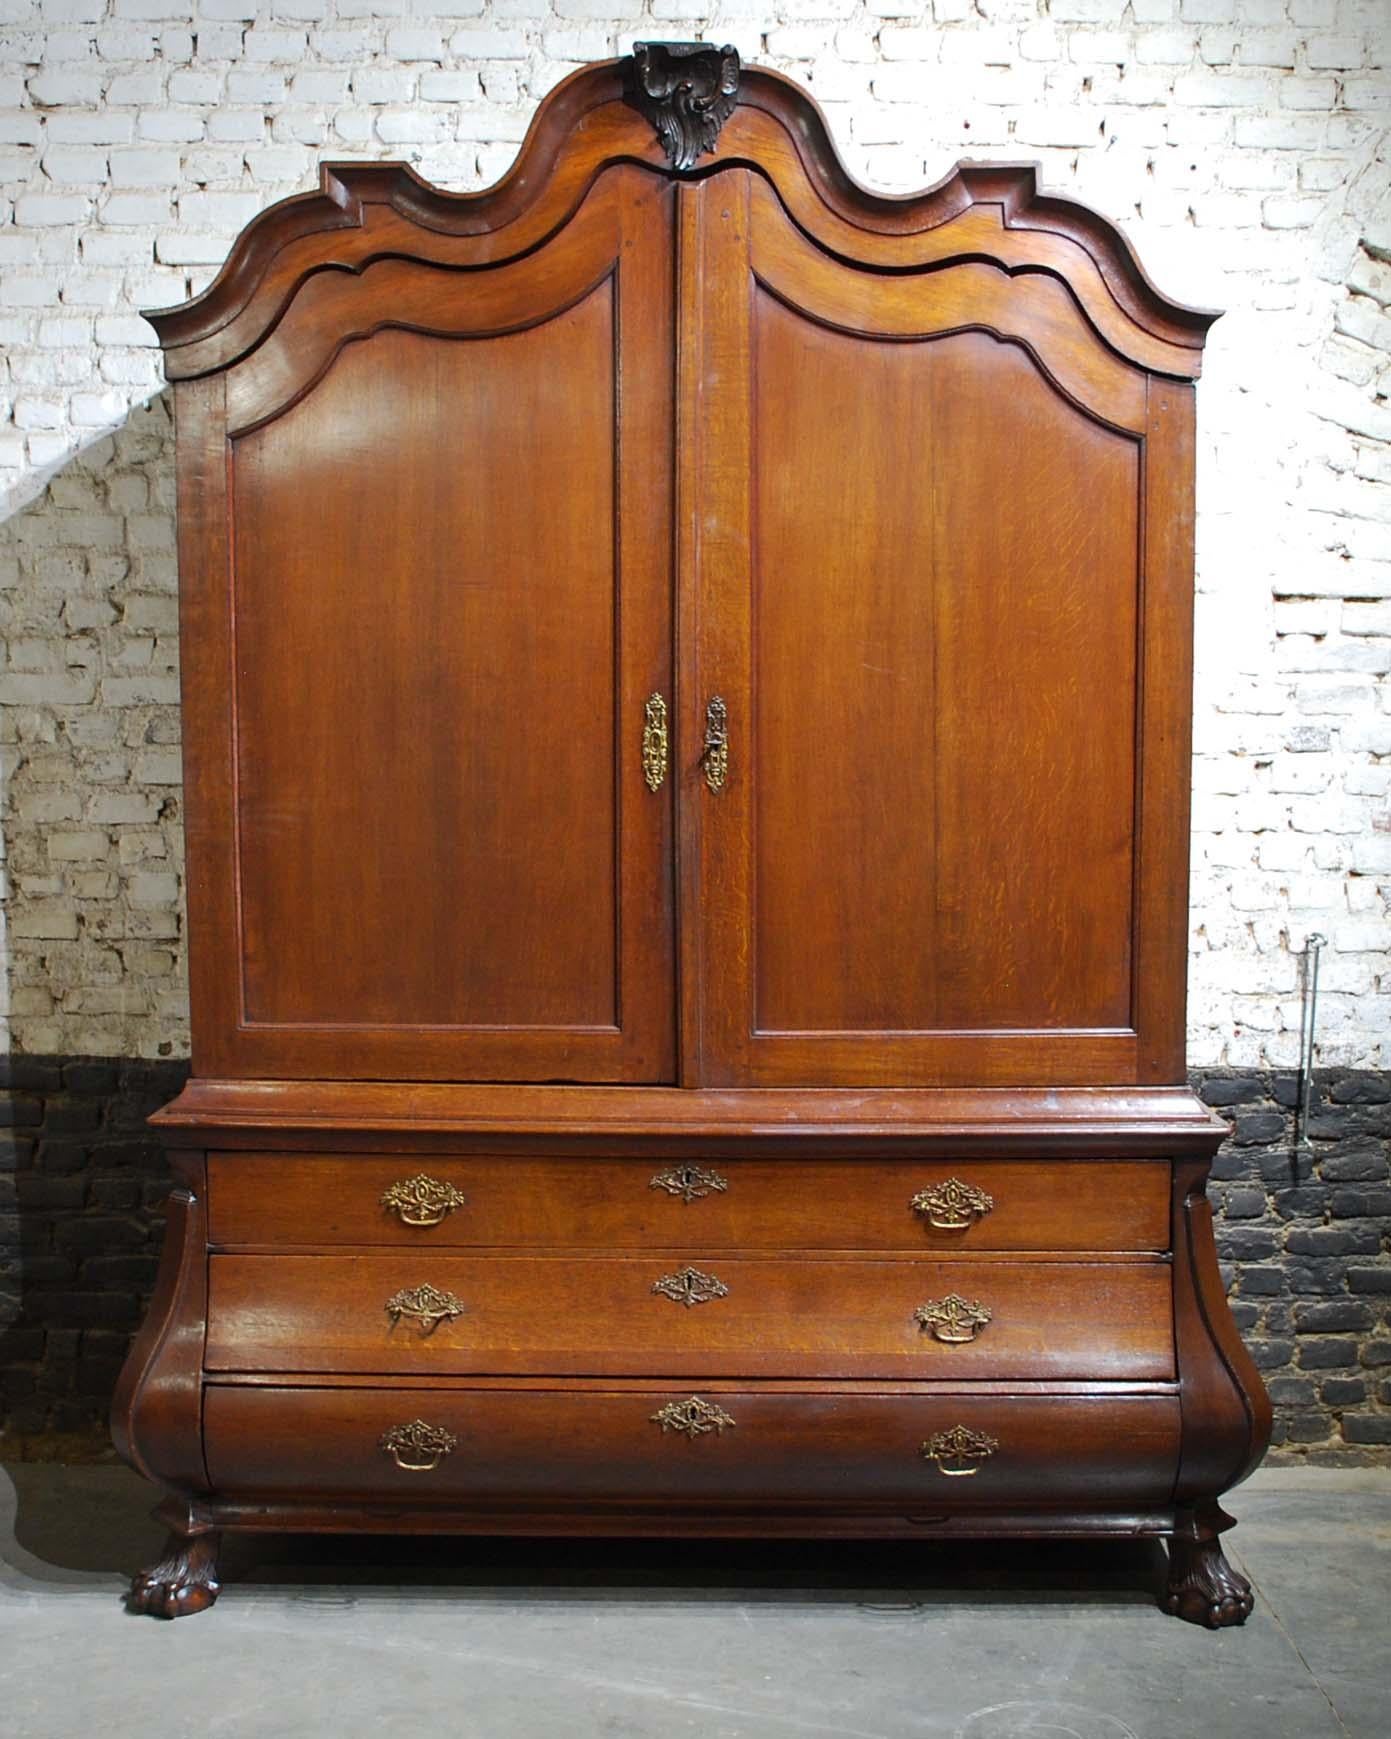 An elegant Dutch cabinet or cupboard that was made in The Netherlands, circa 1820s.
It was completely made in the best quality fine European oak. It has a bombe base ending on claw and ball feet. The base houses 4 drawers each with the original